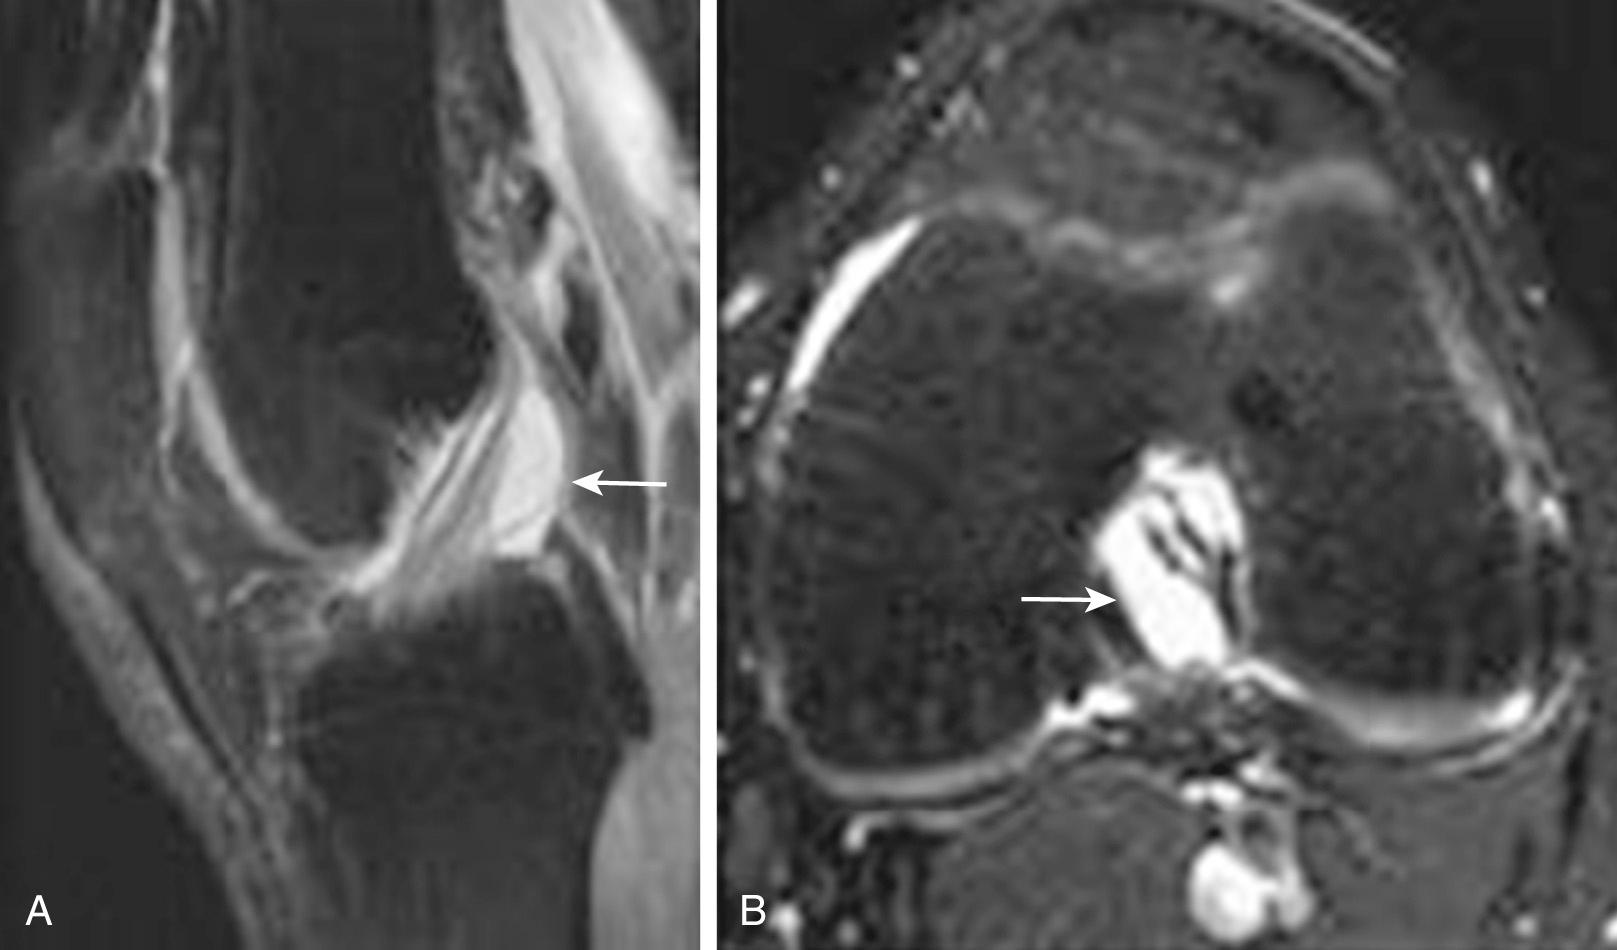 FIG 8.14, Sagittal (A) and axial (B) T2 fat-saturated images demonstrate loculated fluid extending along the length of the anterior cruciate ligament (arrows) representing an anterior cruciate ligament ganglion. Axial T2 fat-saturated image demonstrates a Baker cyst between the semimembranosus (arrow) and the medial head of the gastrocnemius (arrowhead) tendon. Axial T2 fat-saturated image demonstrates a ruptured Baker cyst with fluid dissecting along the subcutaneous tissues (arrow) .